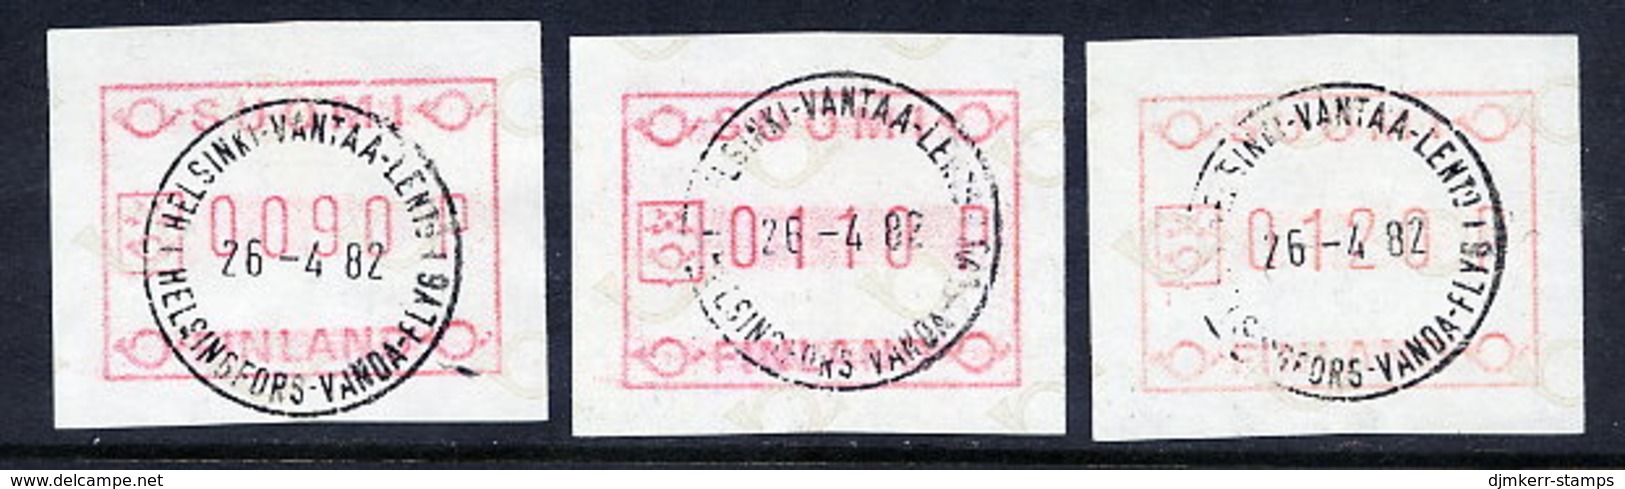 FINLAND 1982 Definitive , 3 Different Values Used .Michel 1 - Machine Labels [ATM]